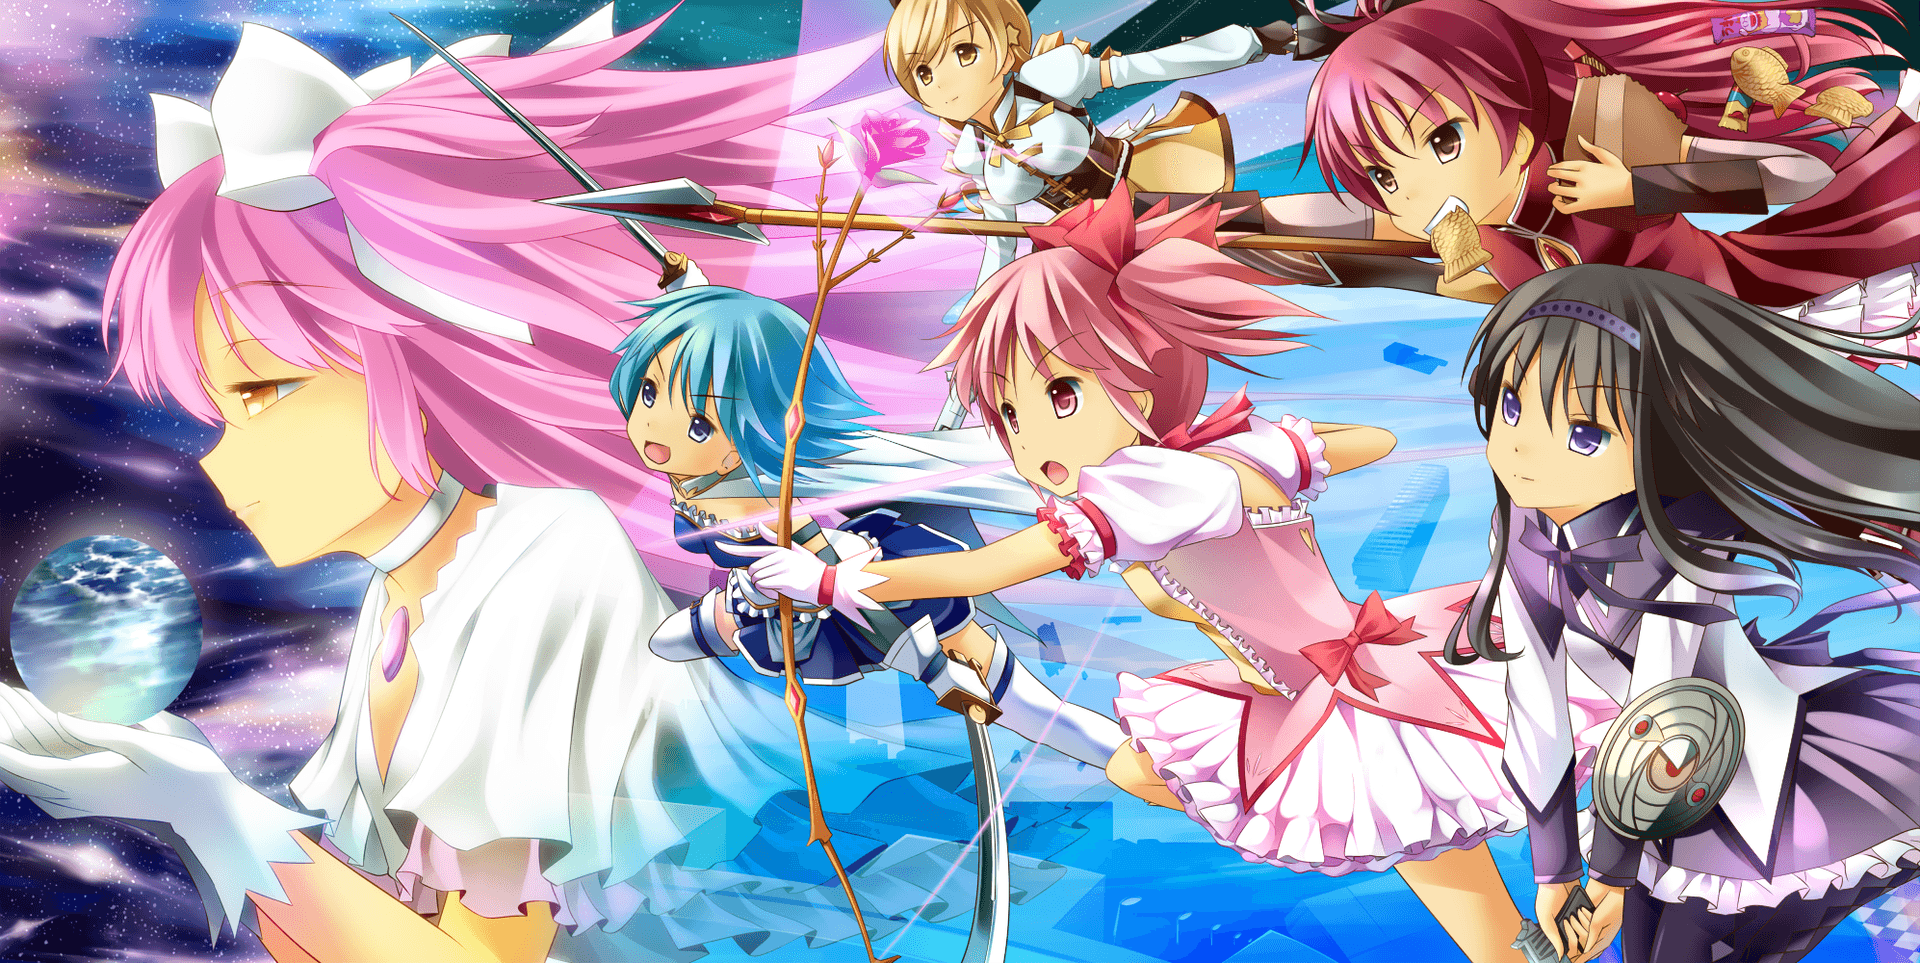 "ethereal Display Of Characters In The Magical World Of Madoka Magica"